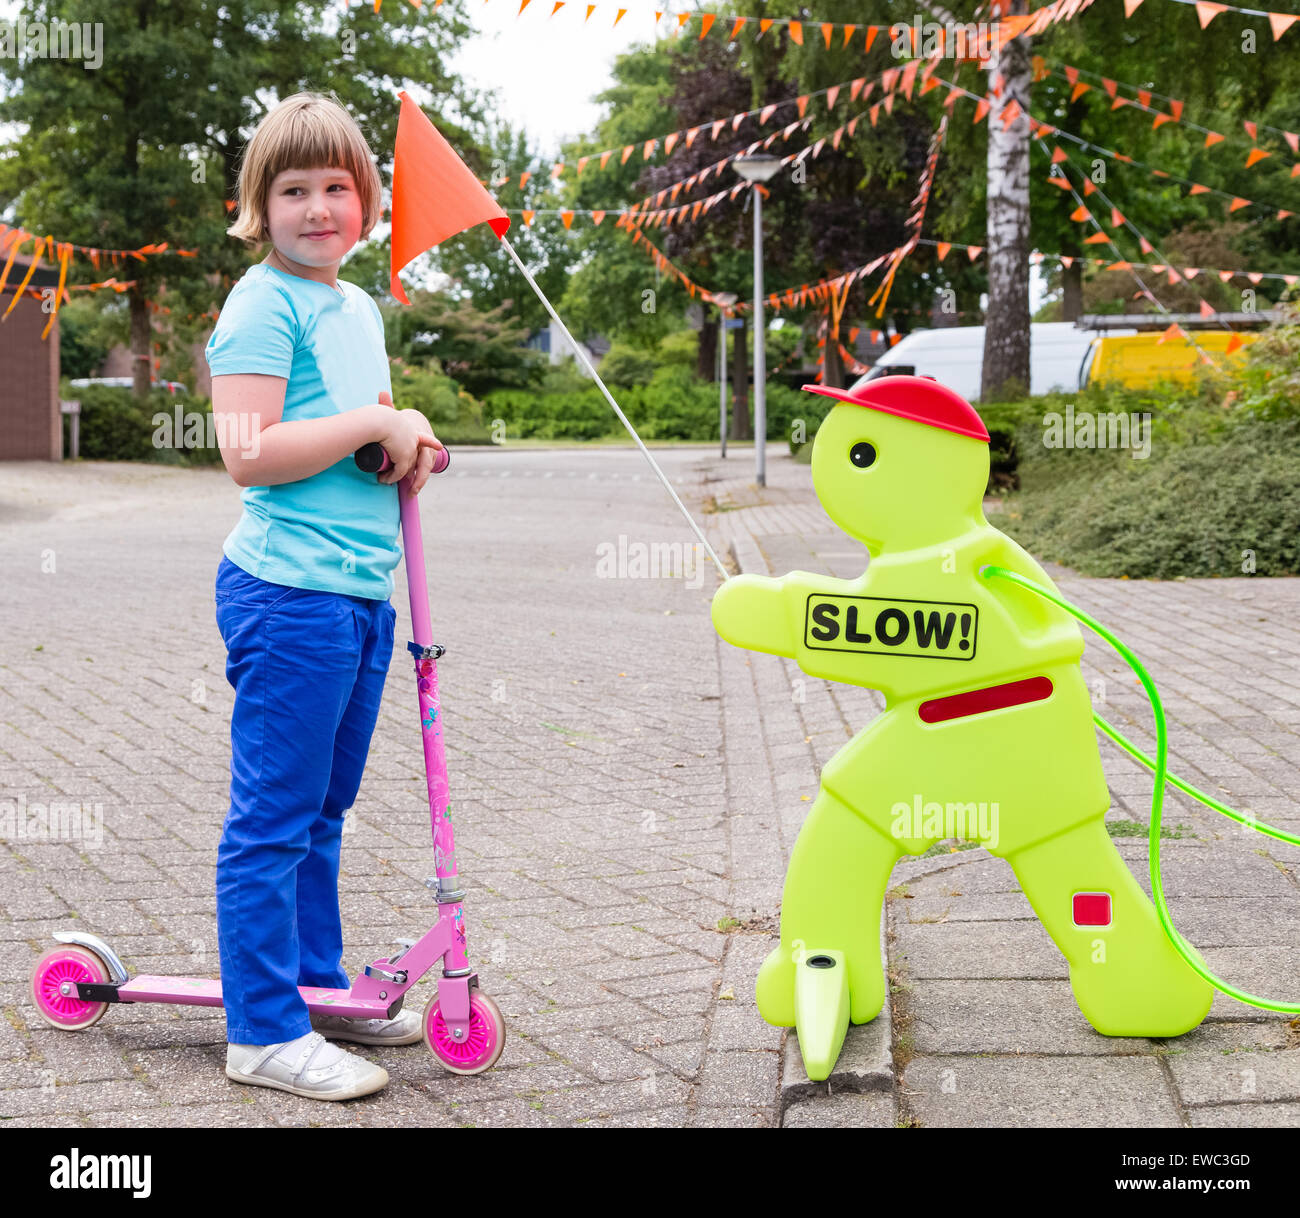 Young caucasian girl on pink  scooter with safety figurine in street Stock Photo